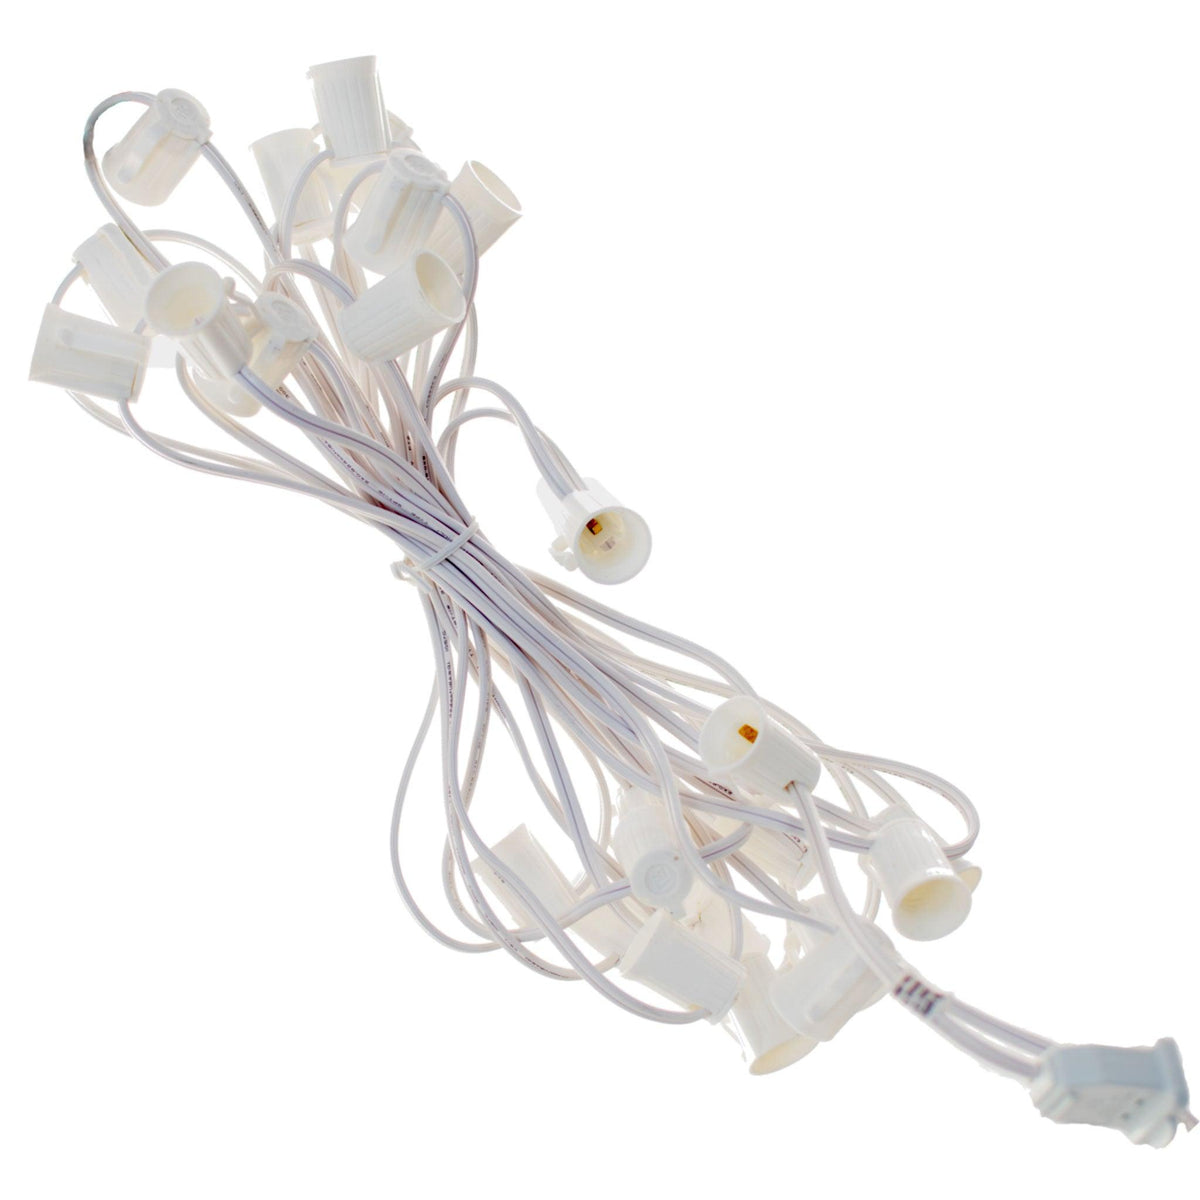 Lee Display's G50 Globe Lighting Patio String Sets with 25ft cords included